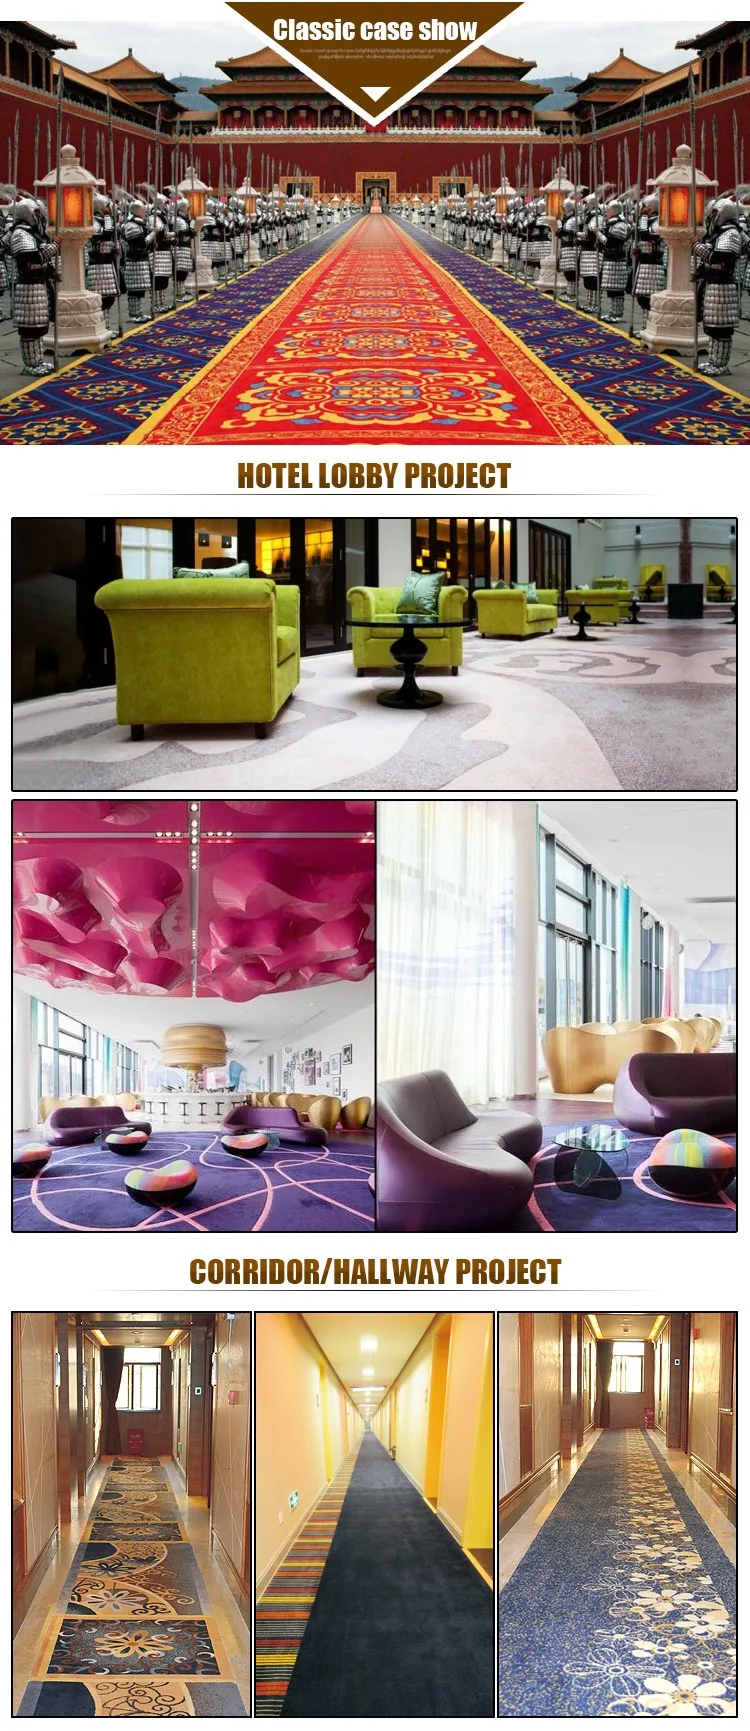 100% Fireproof Nylon Printed Carpets for Five-star Hotel